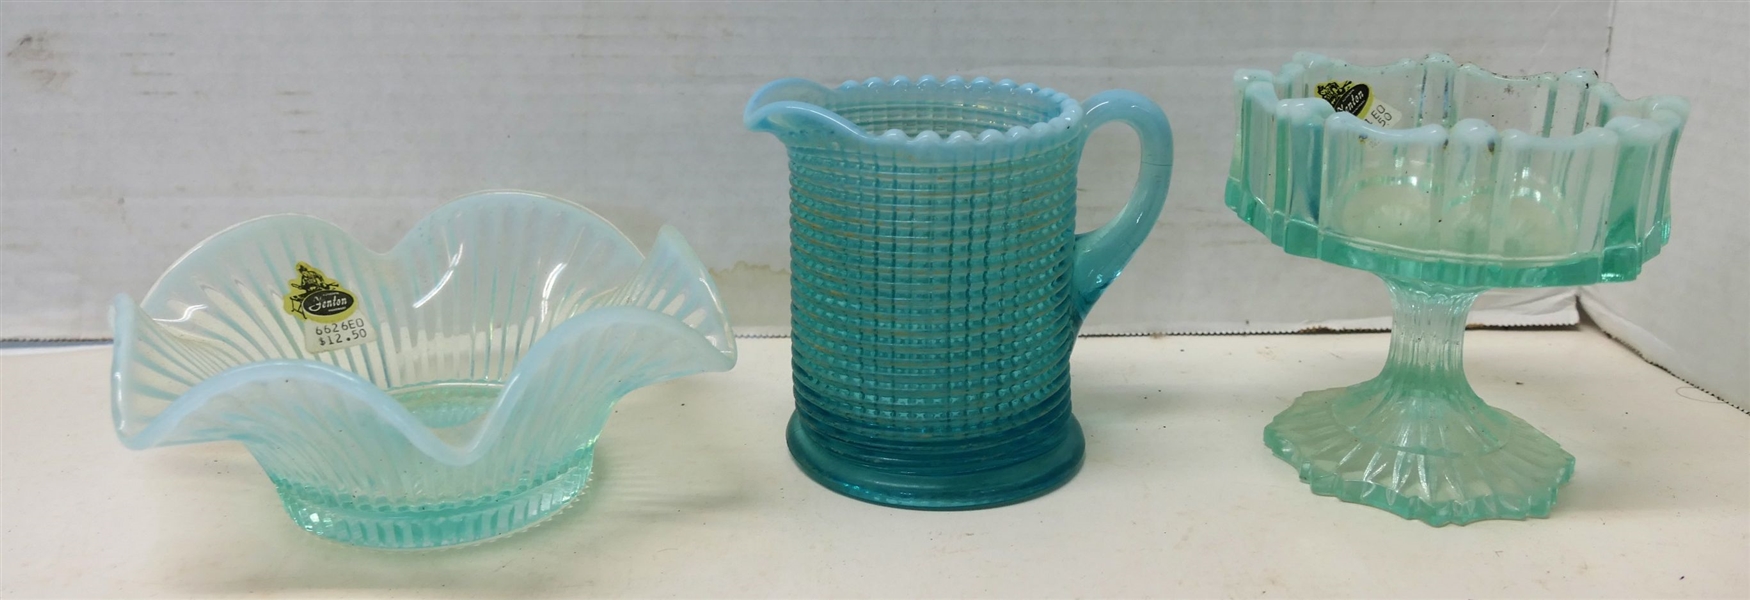 3 Pieces of Blue Opalescent - Fenton 7" Ribbed Bowl with Original Sticker, Fenton 4" Compote with Original Sticker, and 4" Pitcher